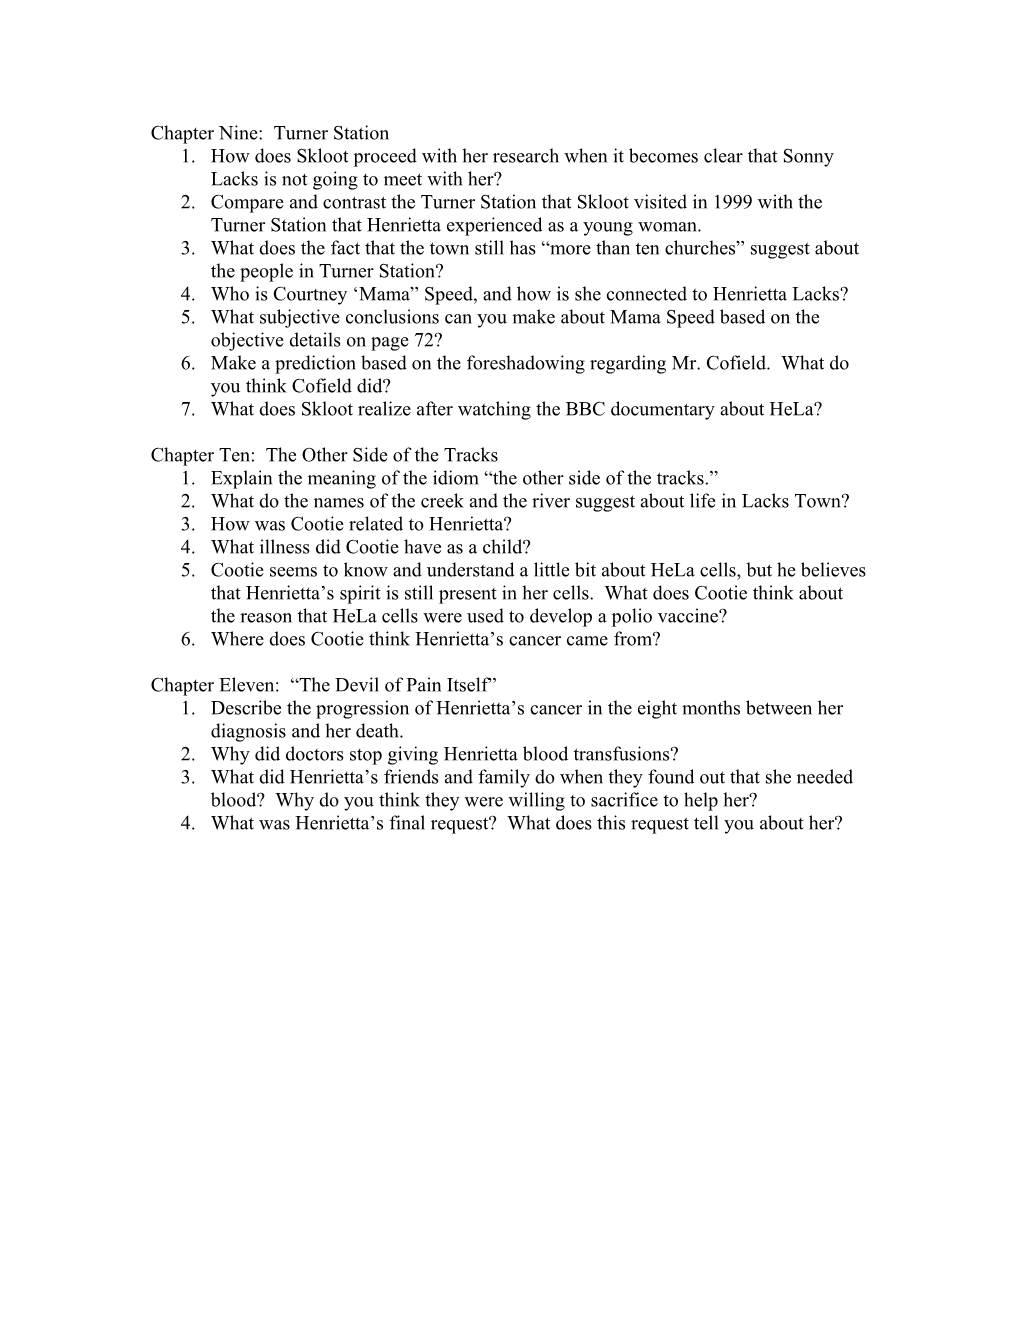 Guided Reading and Discussion Question for Hela Chapters 6 Through 11